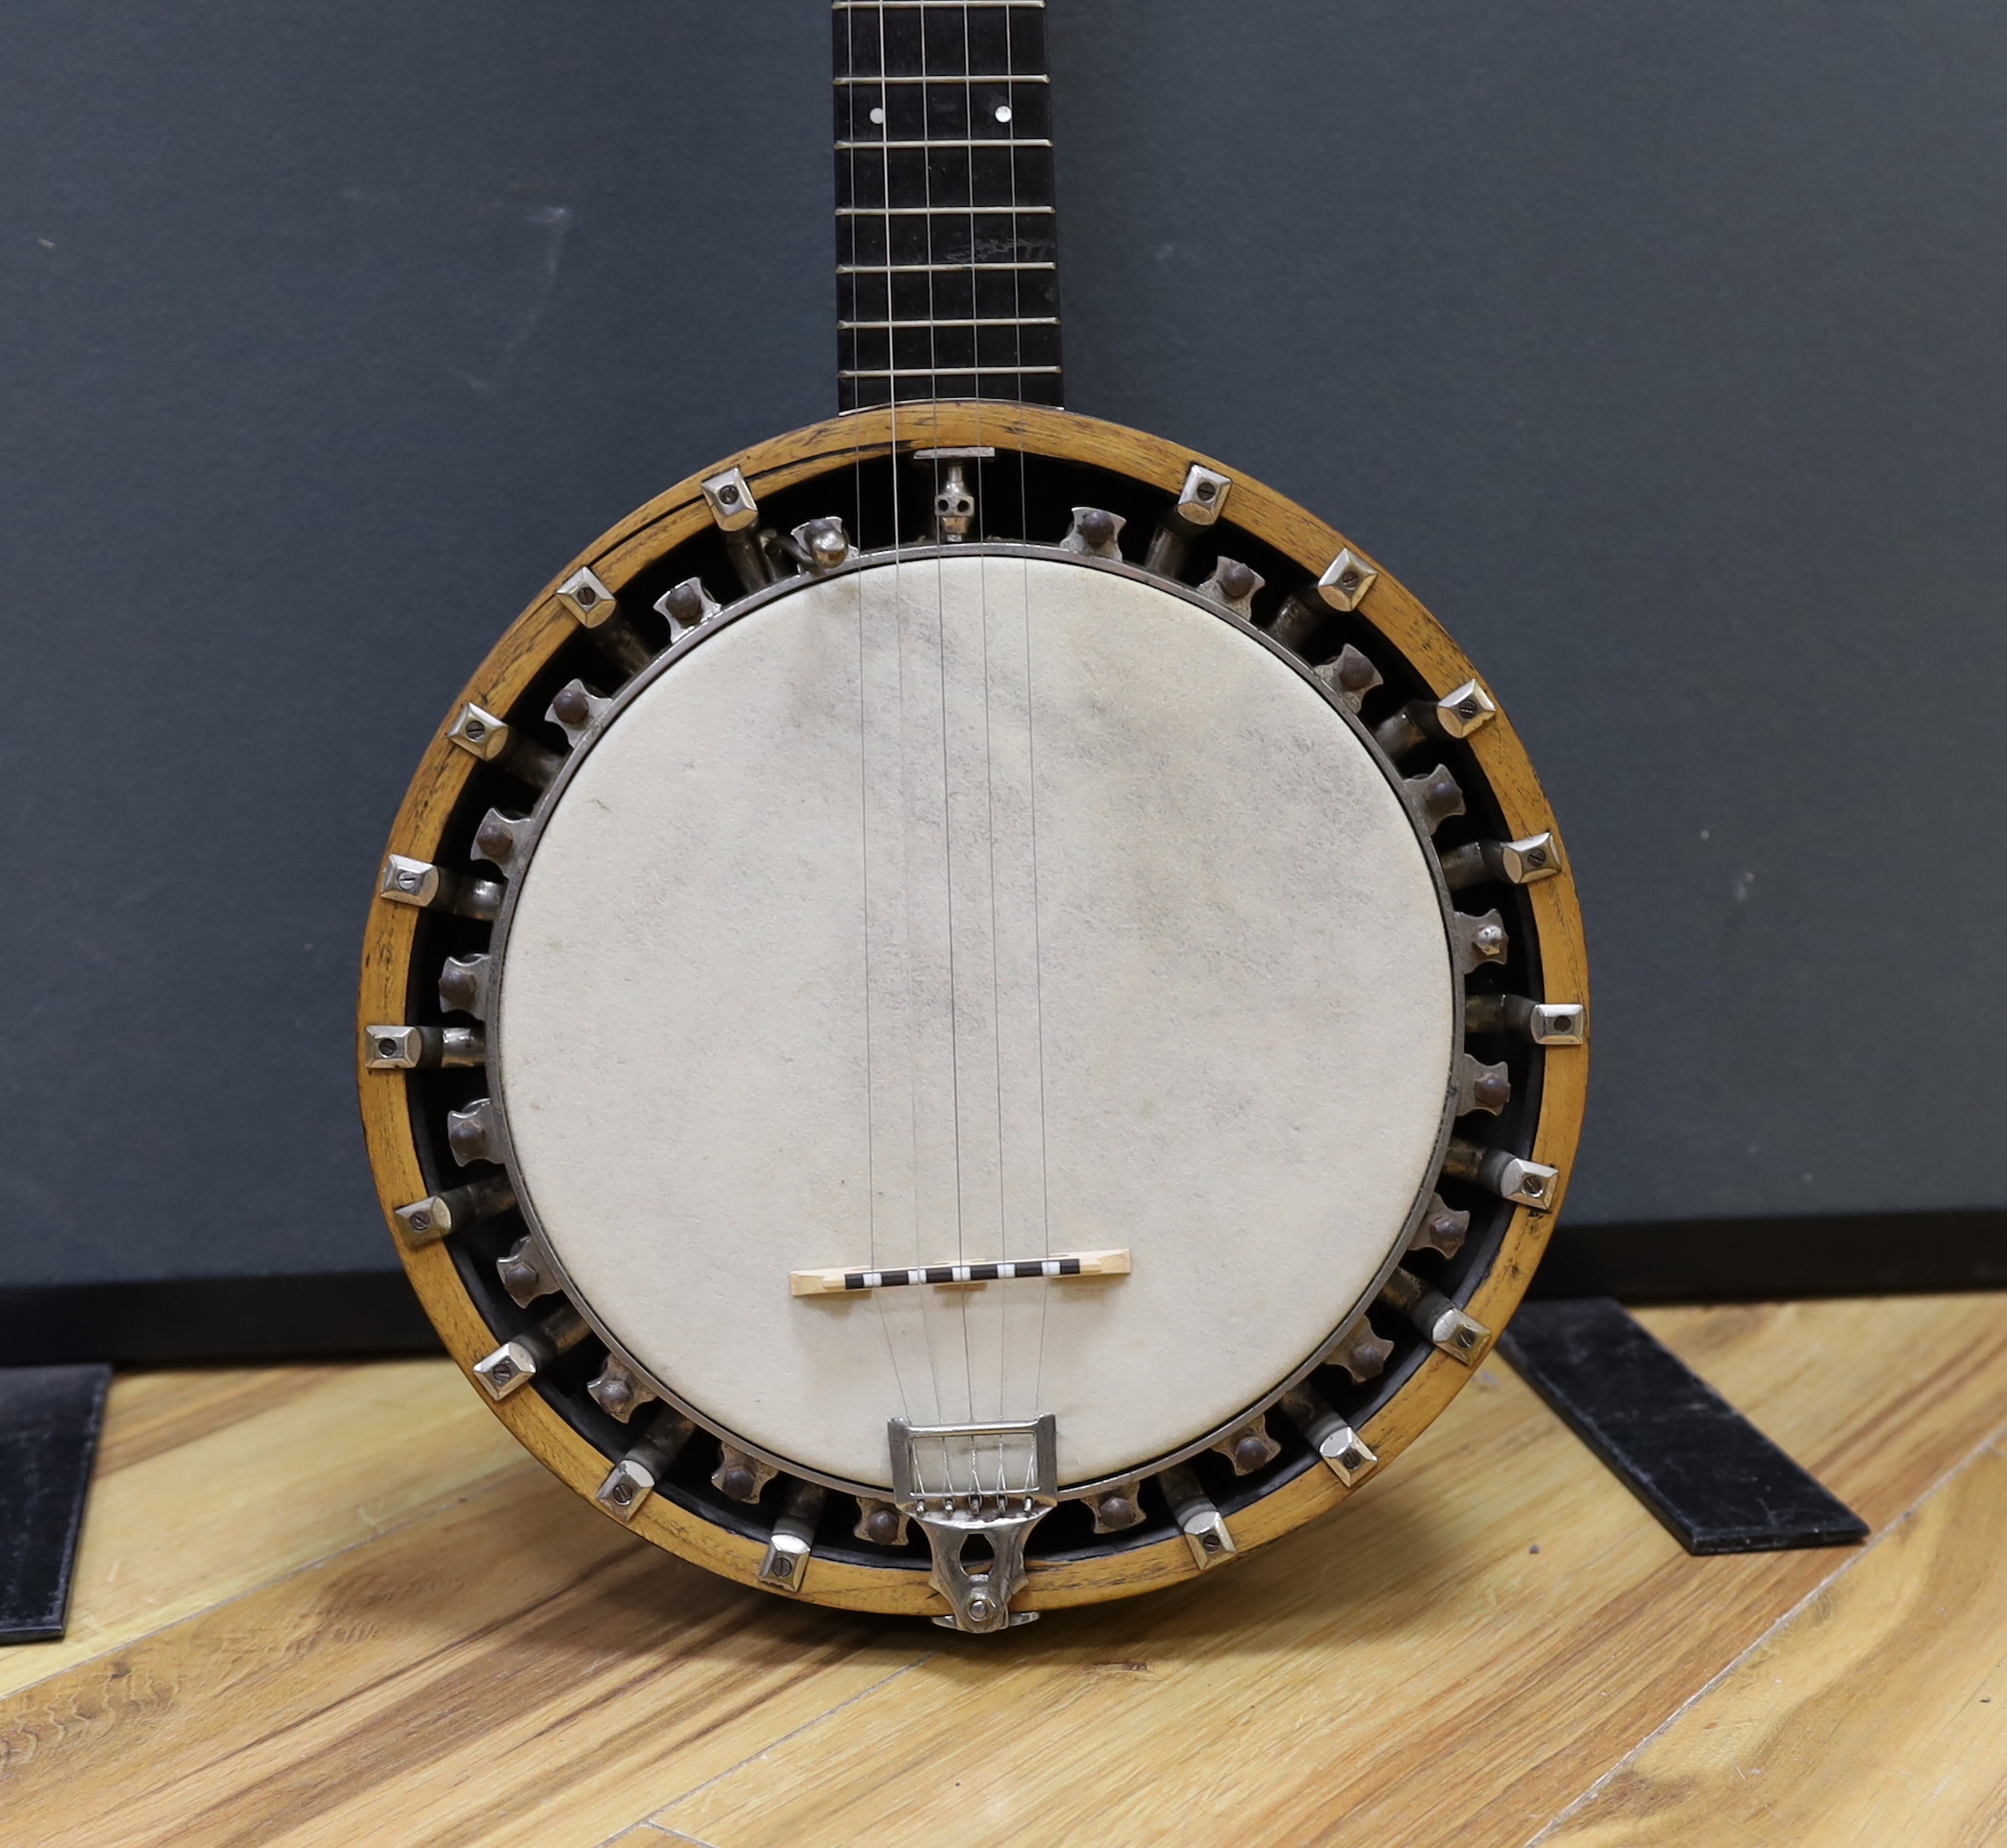 A six string banjo, unmarked, in a hard case by Ashbury